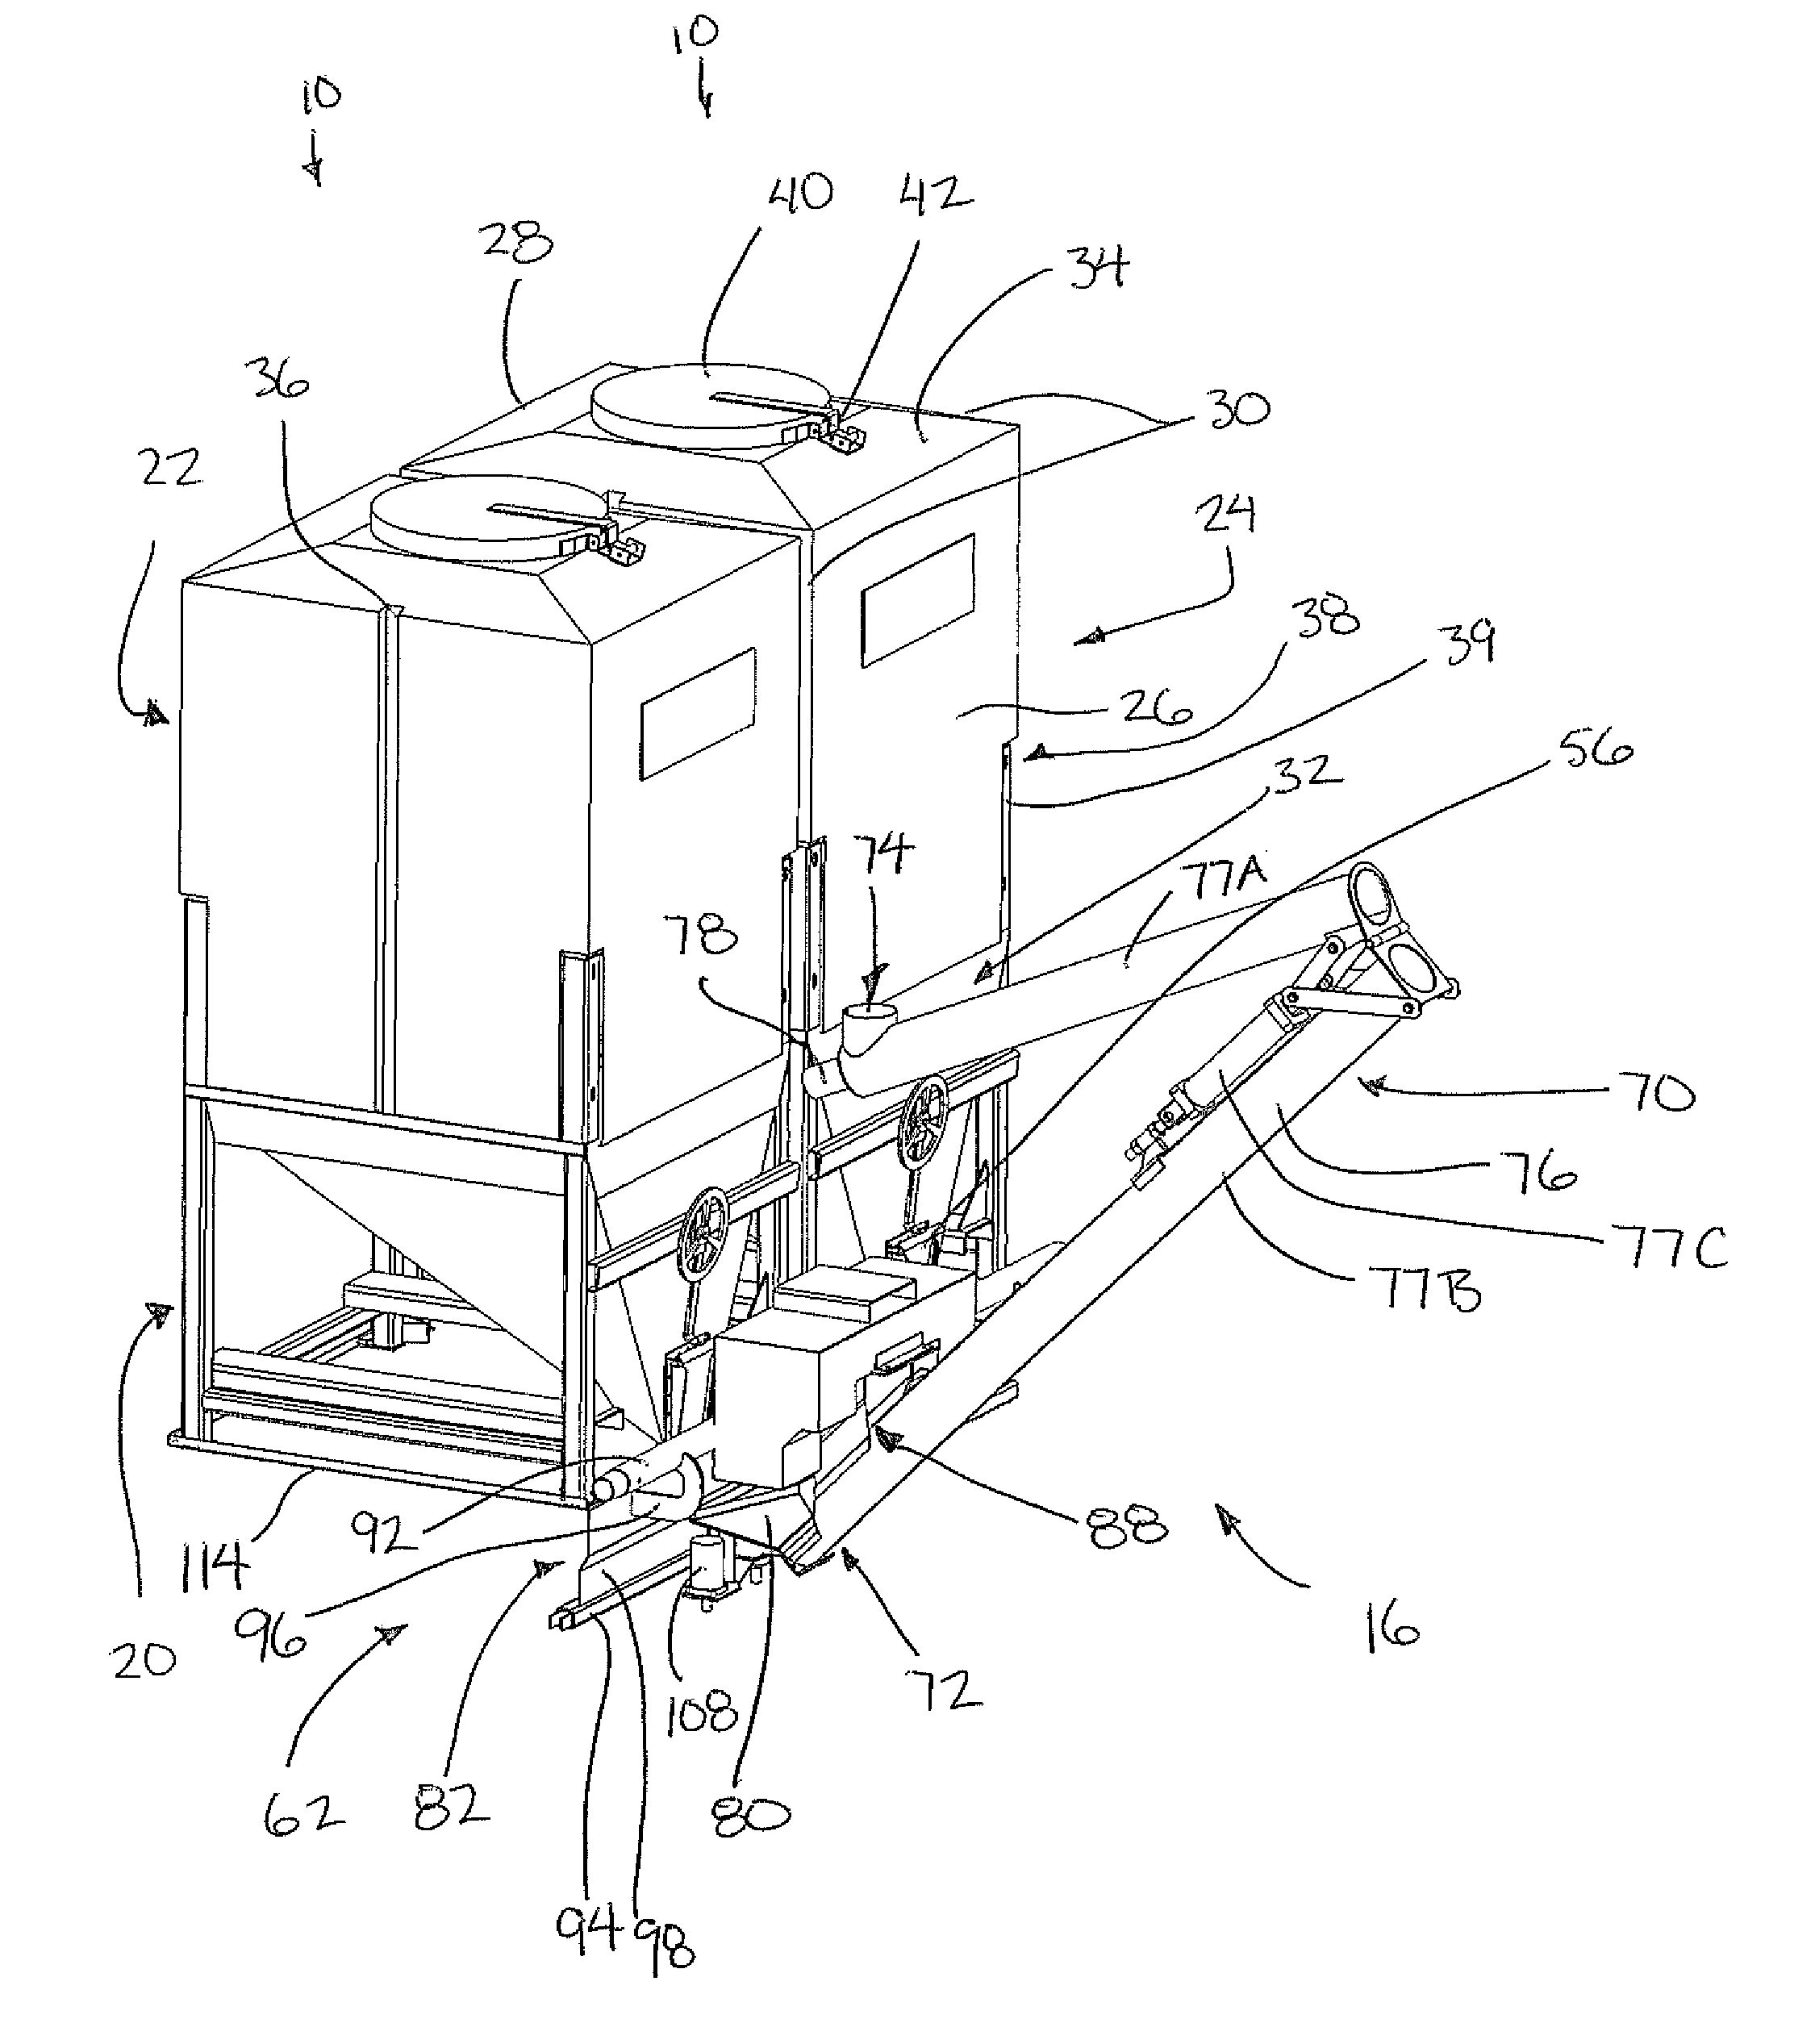 Bulk Material Container and Container Discharging Apparatus